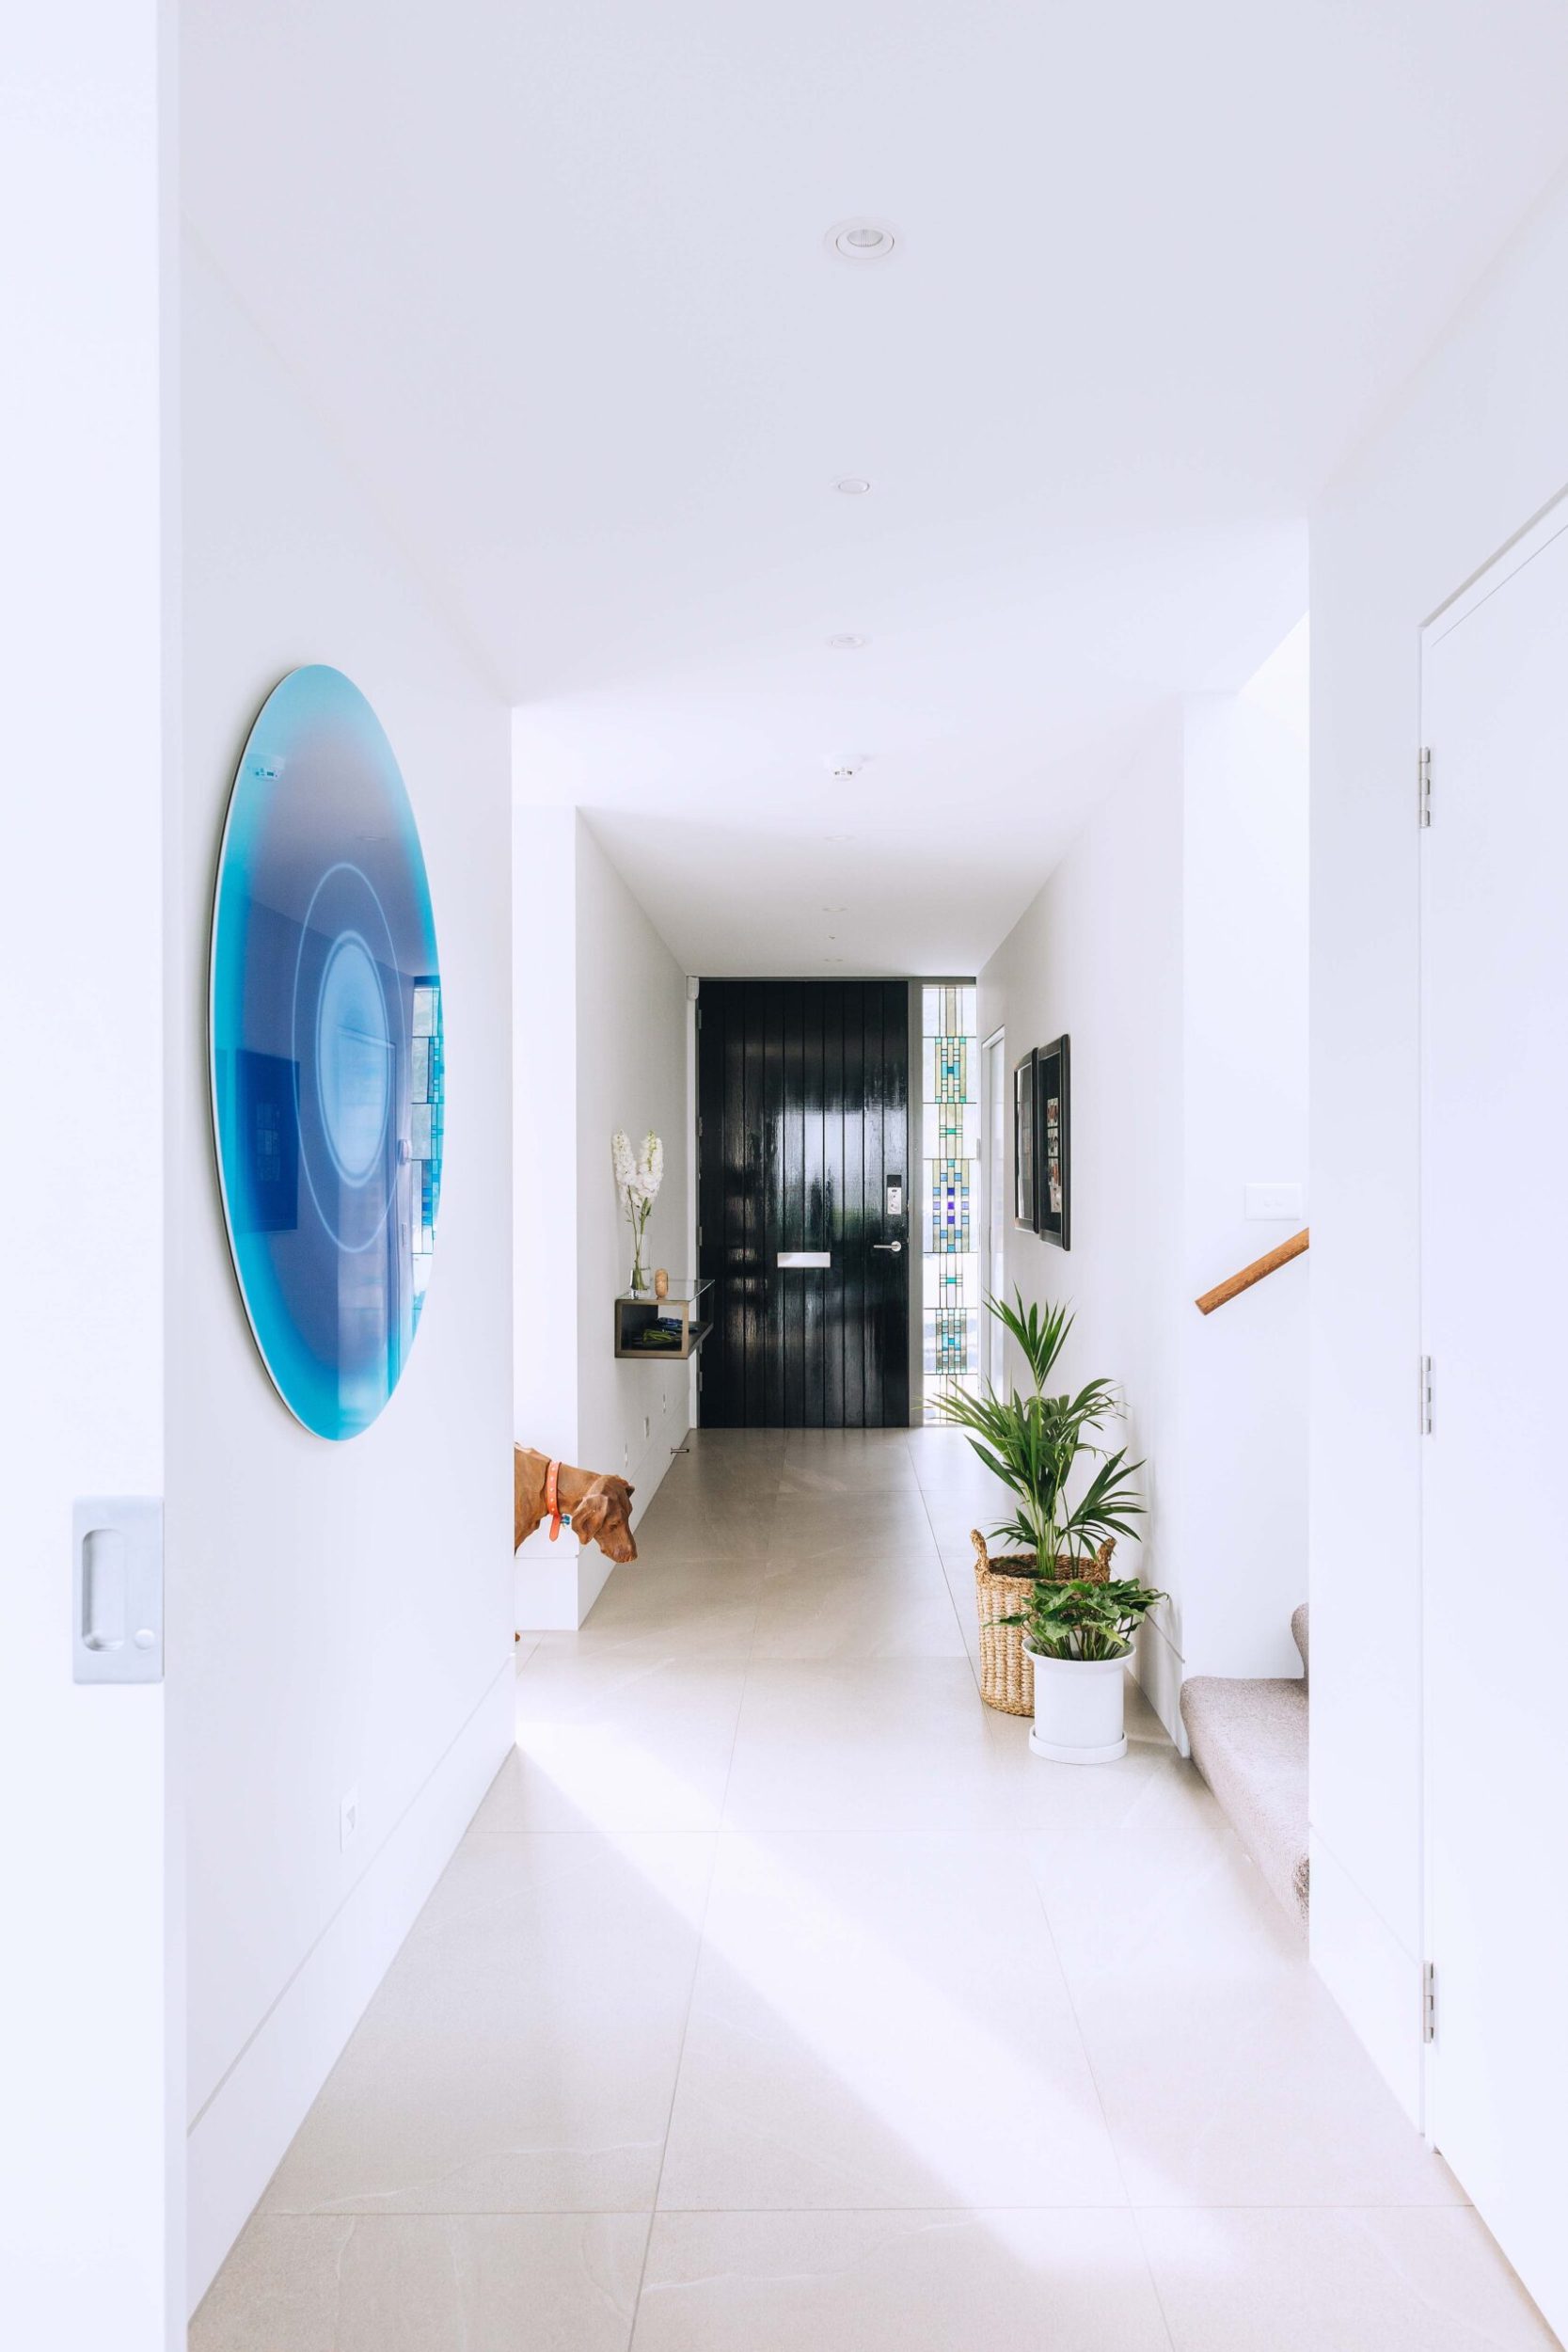 Home entryway with white walls, grey floor tiles, a black door and a round large blue decorative Max Patté wall art